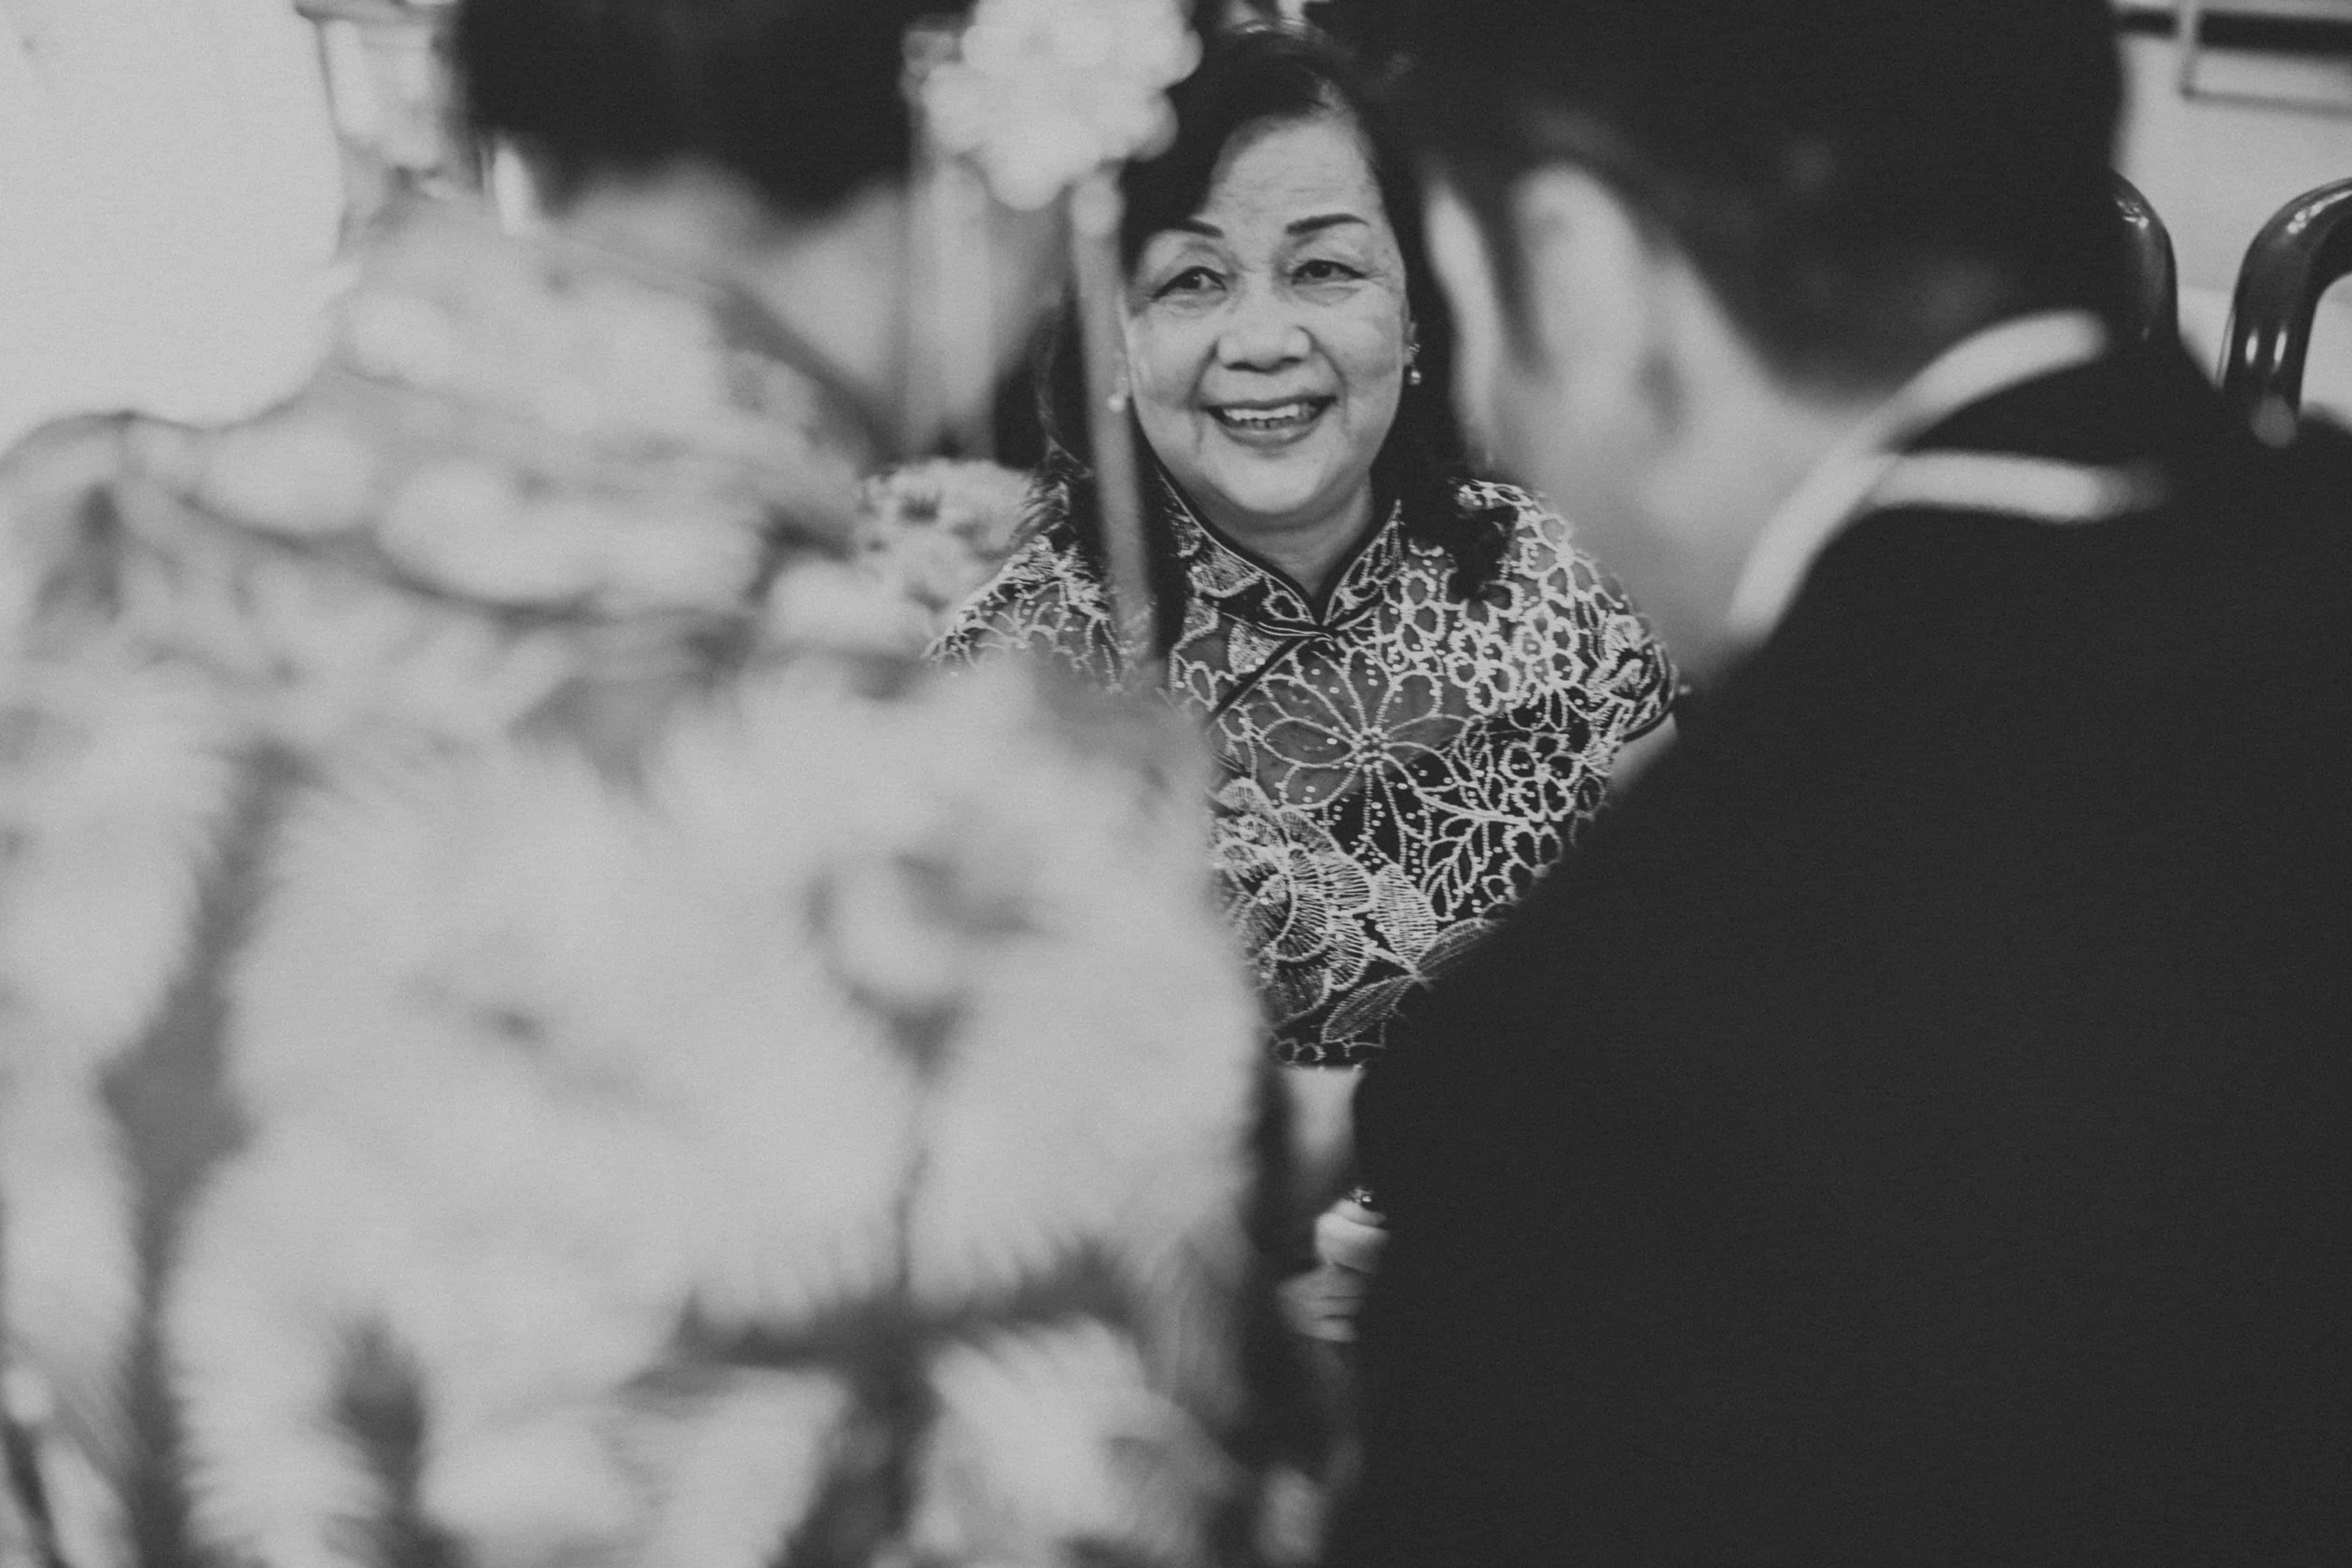 St. Regis Kuala Lumpur Hotel The Cross Effects Malaysia Destination Wedding Photographers Actual Day in Petaling Jaya Photography Traditional Chinese Tea Ceremony